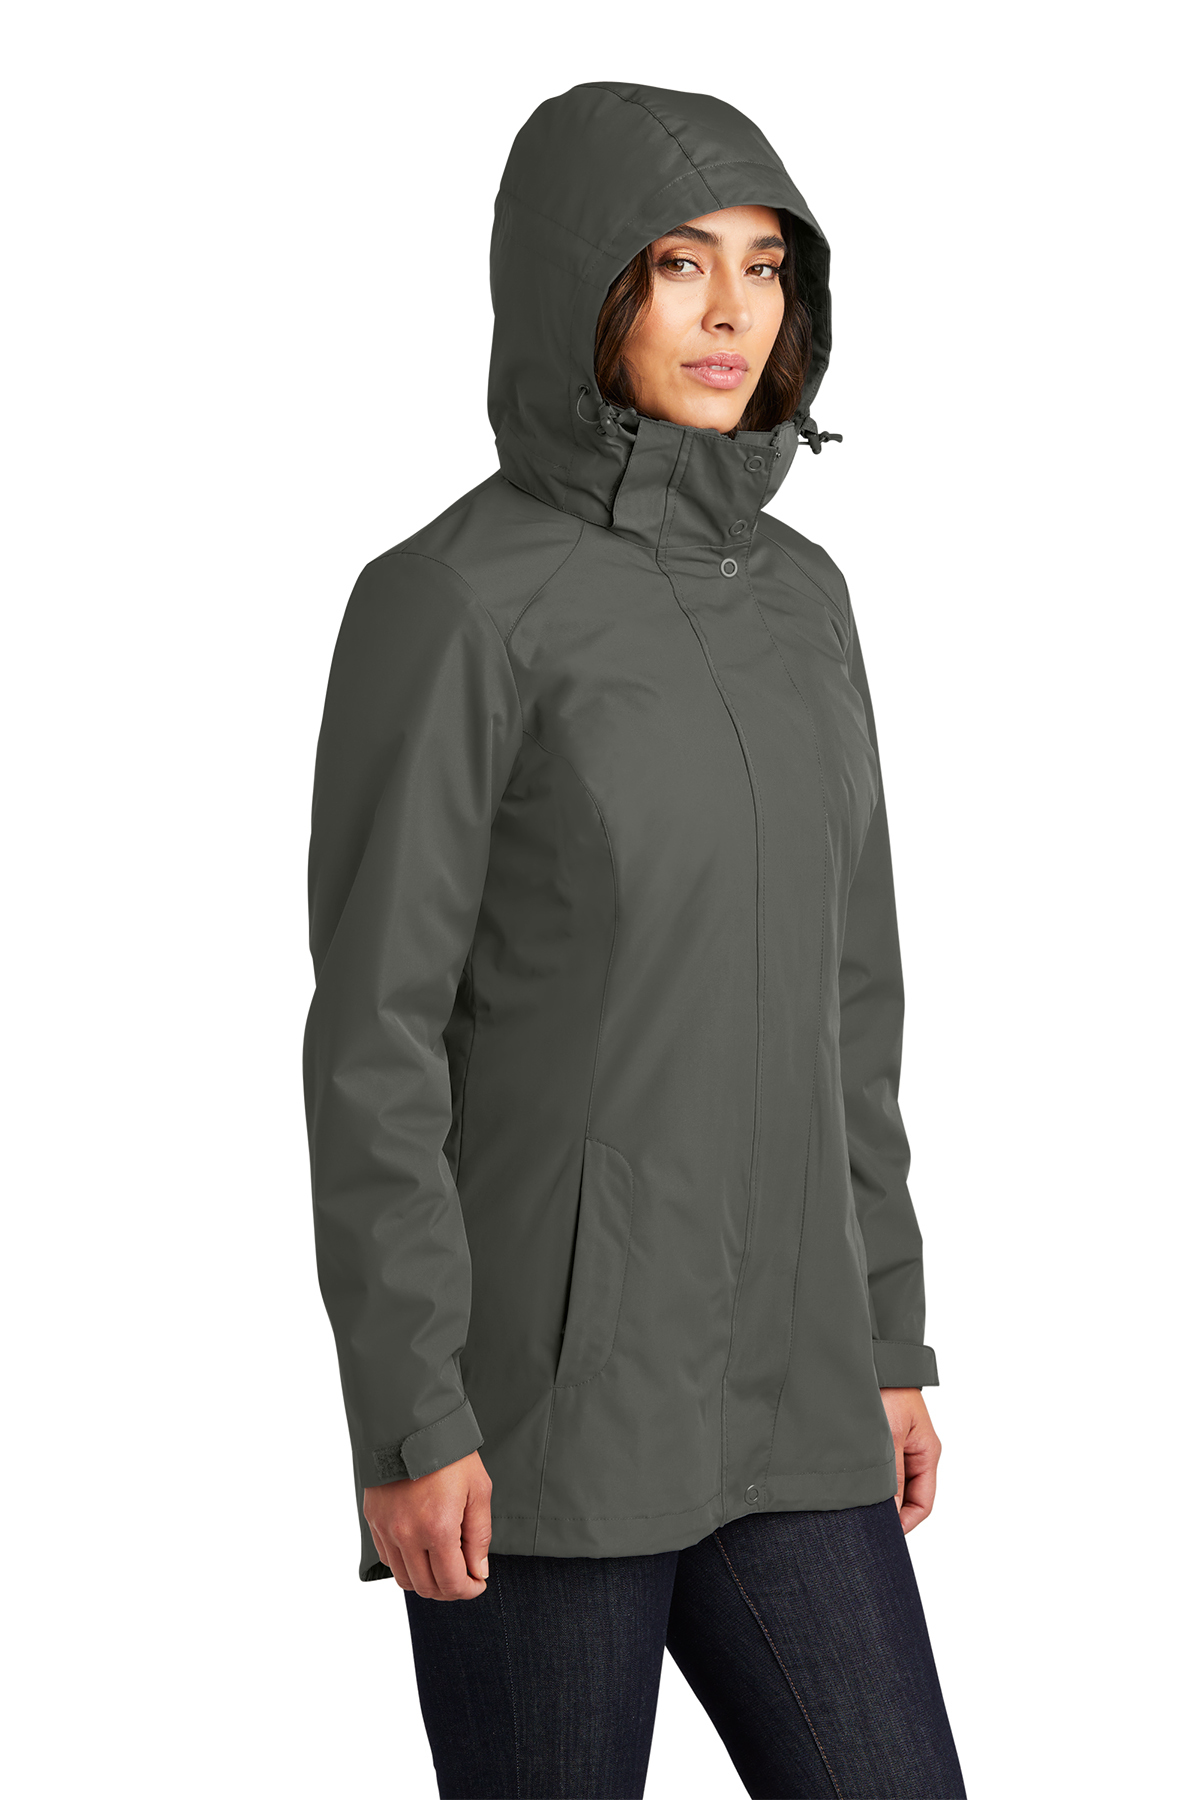 Port Authority Ladies All-Weather 3-in-1 Jacket | Product | SanMar